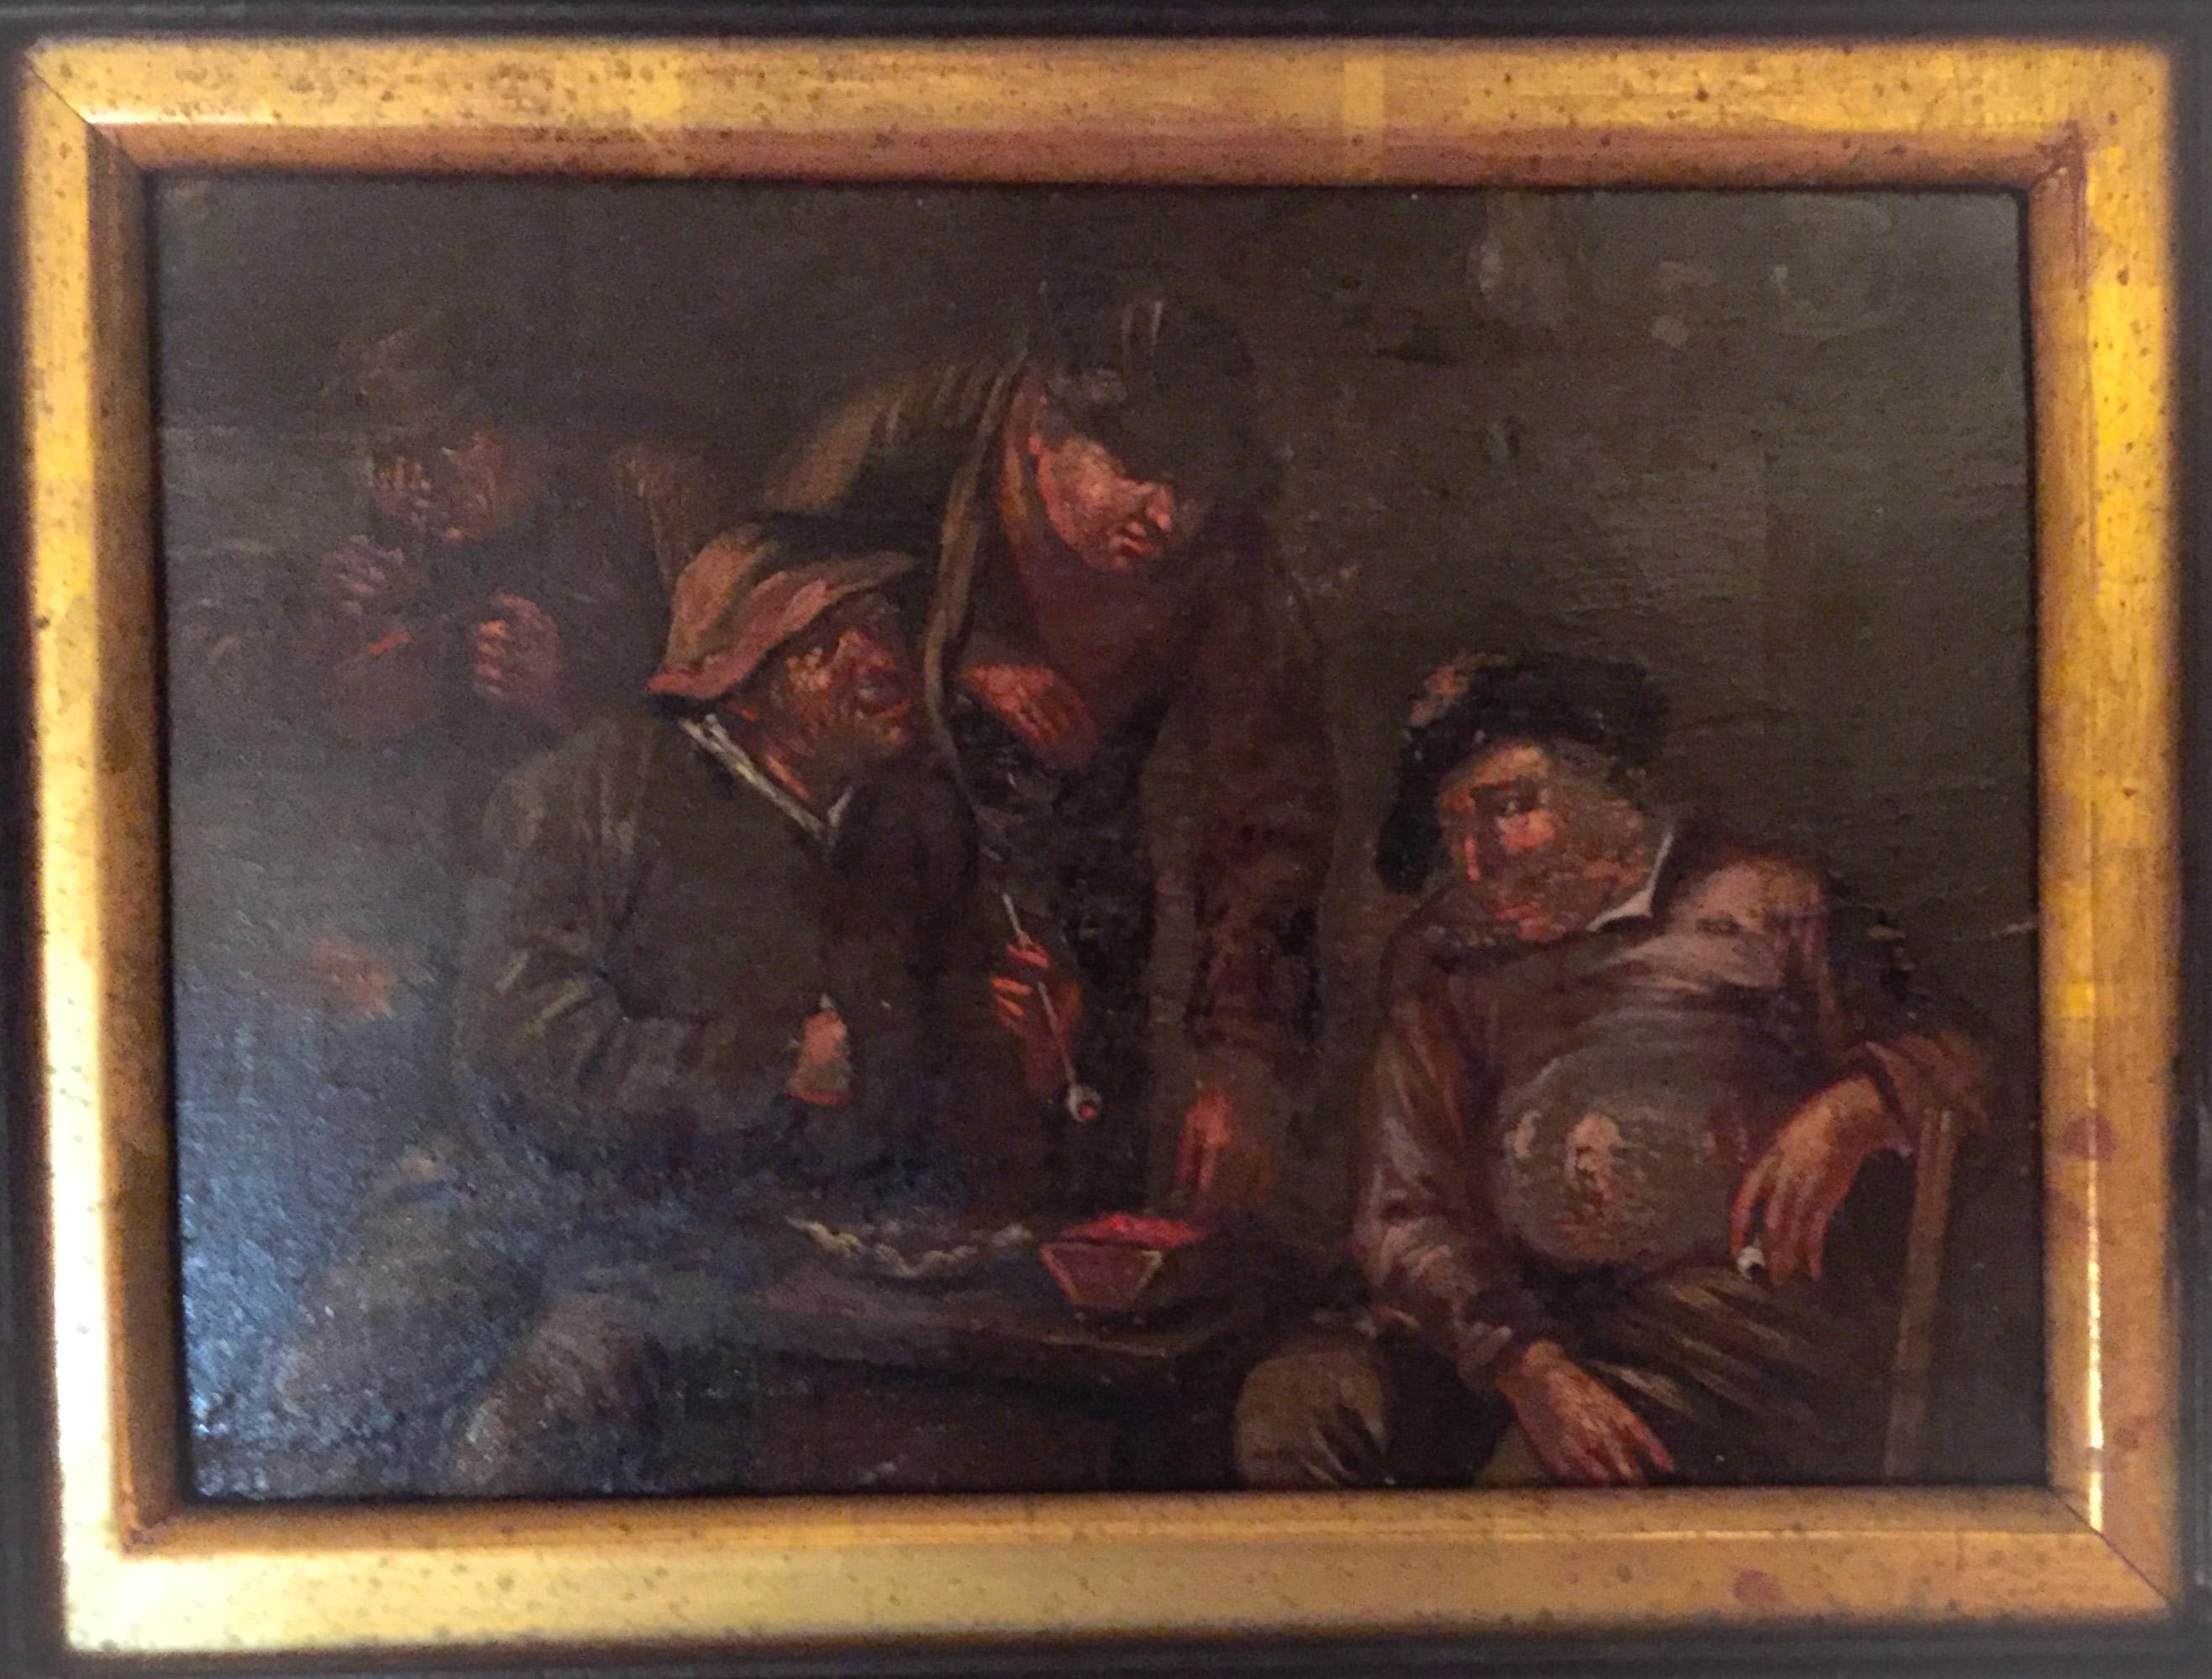 This is an oil painting on a small hand shaved beveled oakwood panel. According to an old label on the back of the panel this painting is attributed to Adriaen van Ostade, known as the painter of The Dutch Golden Age. The painting shows peasants